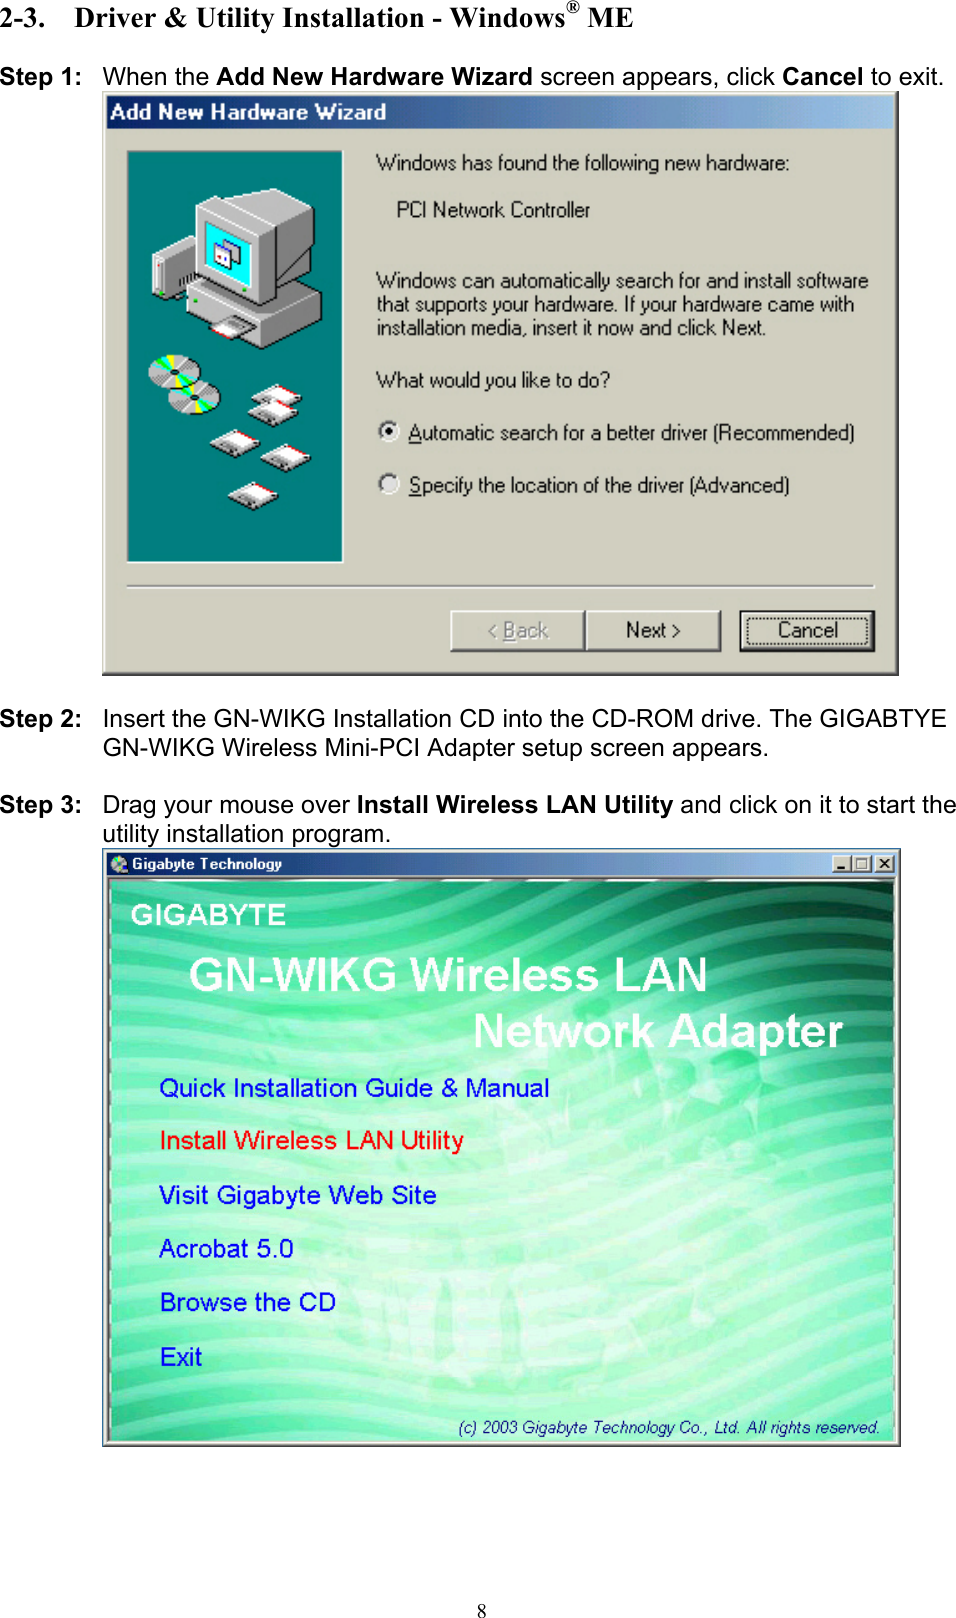 8  2-3.  Driver &amp; Utility Installation - Windows® ME  Step 1: When the Add New Hardware Wizard screen appears, click Cancel to exit.   Step 2:  Insert the GN-WIKG Installation CD into the CD-ROM drive. The GIGABTYE GN-WIKG Wireless Mini-PCI Adapter setup screen appears.  Step 3:  Drag your mouse over Install Wireless LAN Utility and click on it to start the utility installation program.   